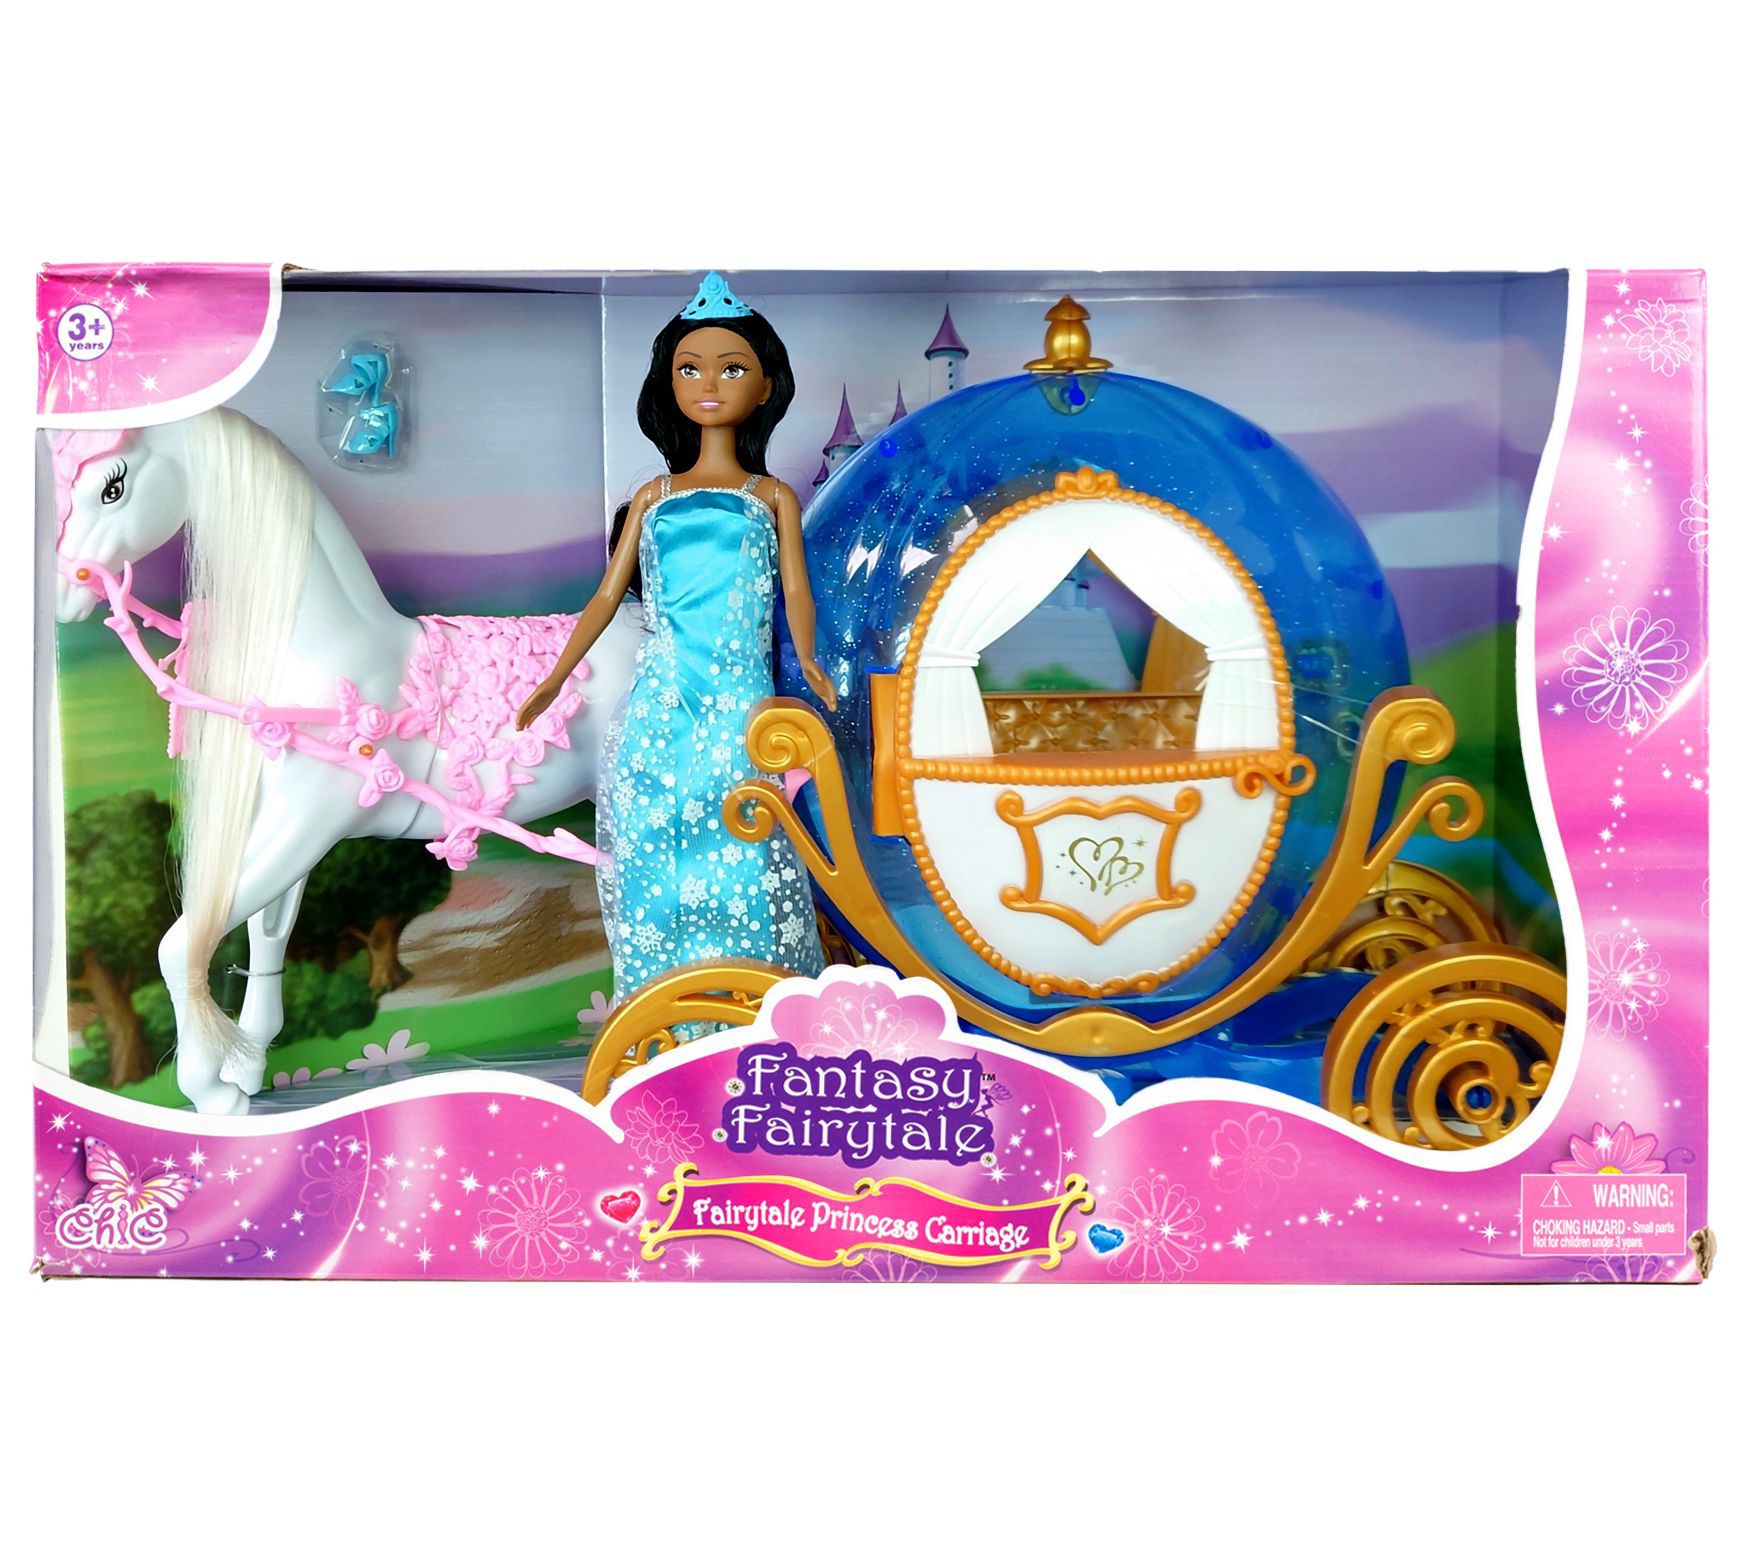 delvist frynser Reklame Chic Princess Doll with Horse and Carriage - QVC.com